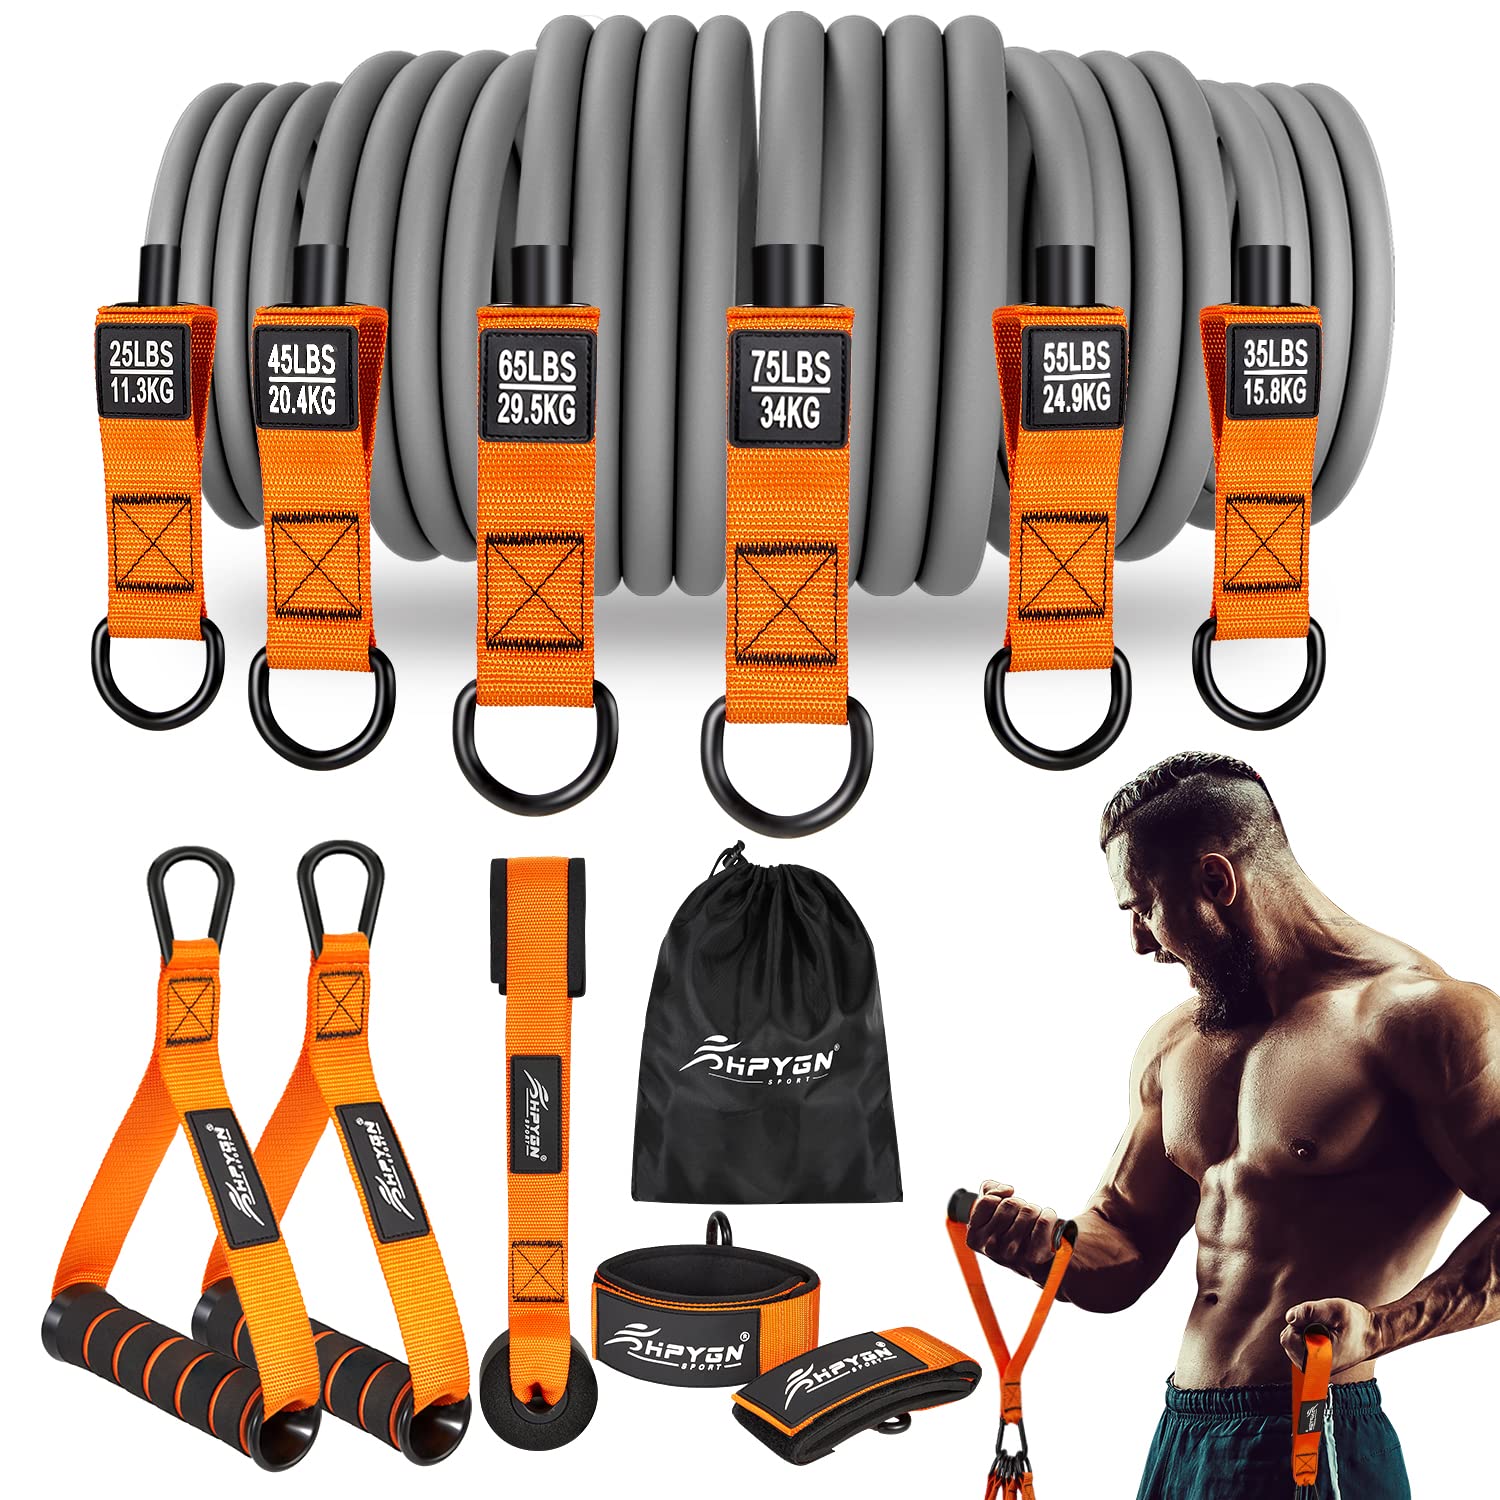 Heavy Resistance Bands 300lbs, Weight Bands for Exercise with Handles, Door  Anchor, Carry Bag, Workout Bands